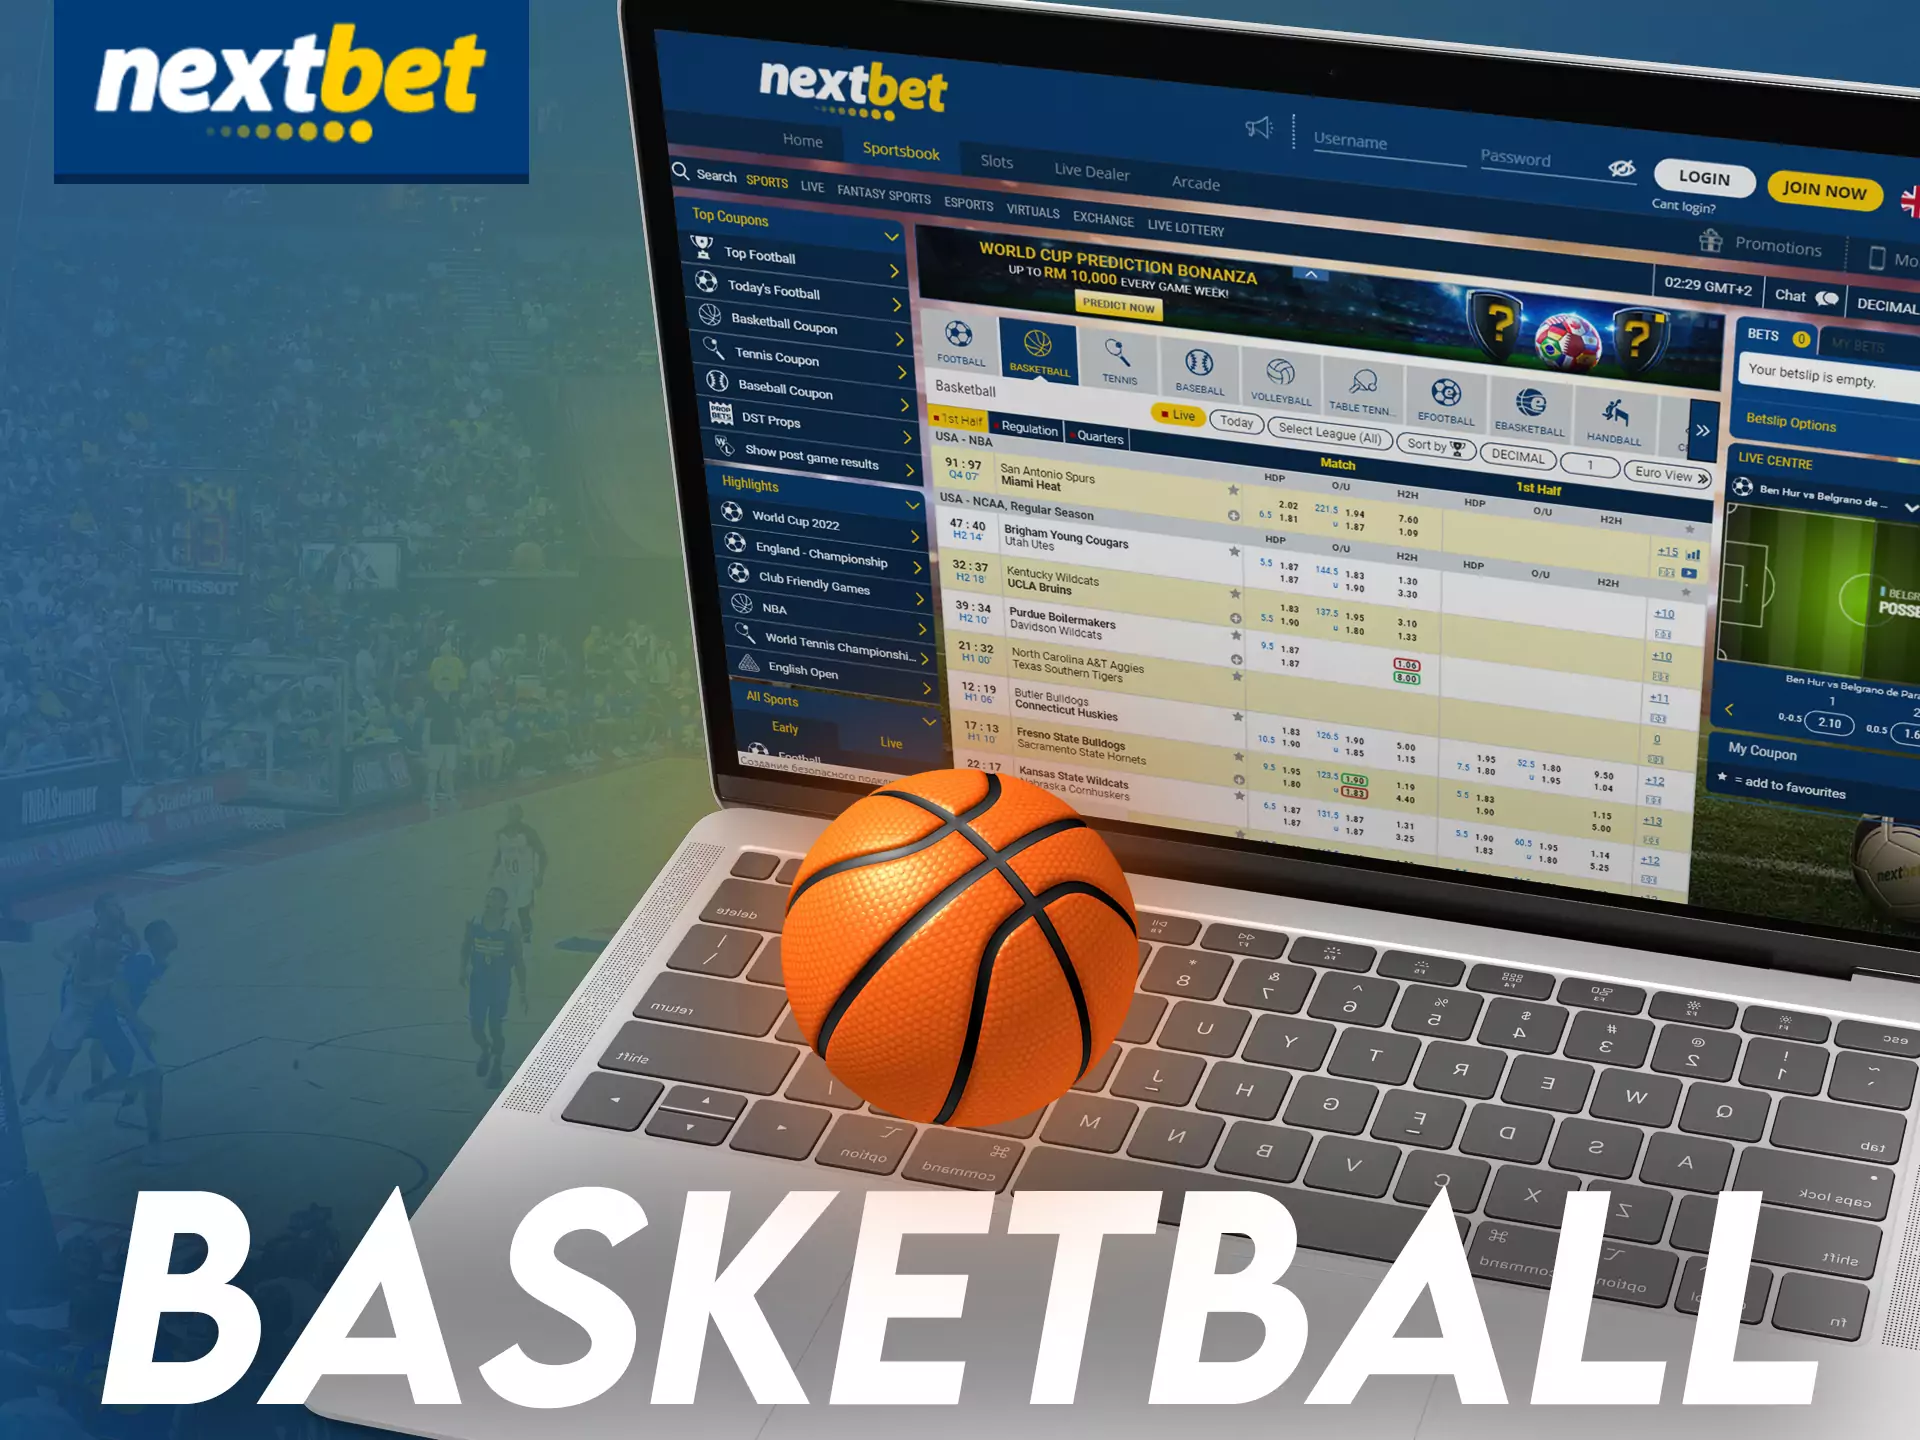 In Nextbet you can bet on basketball.